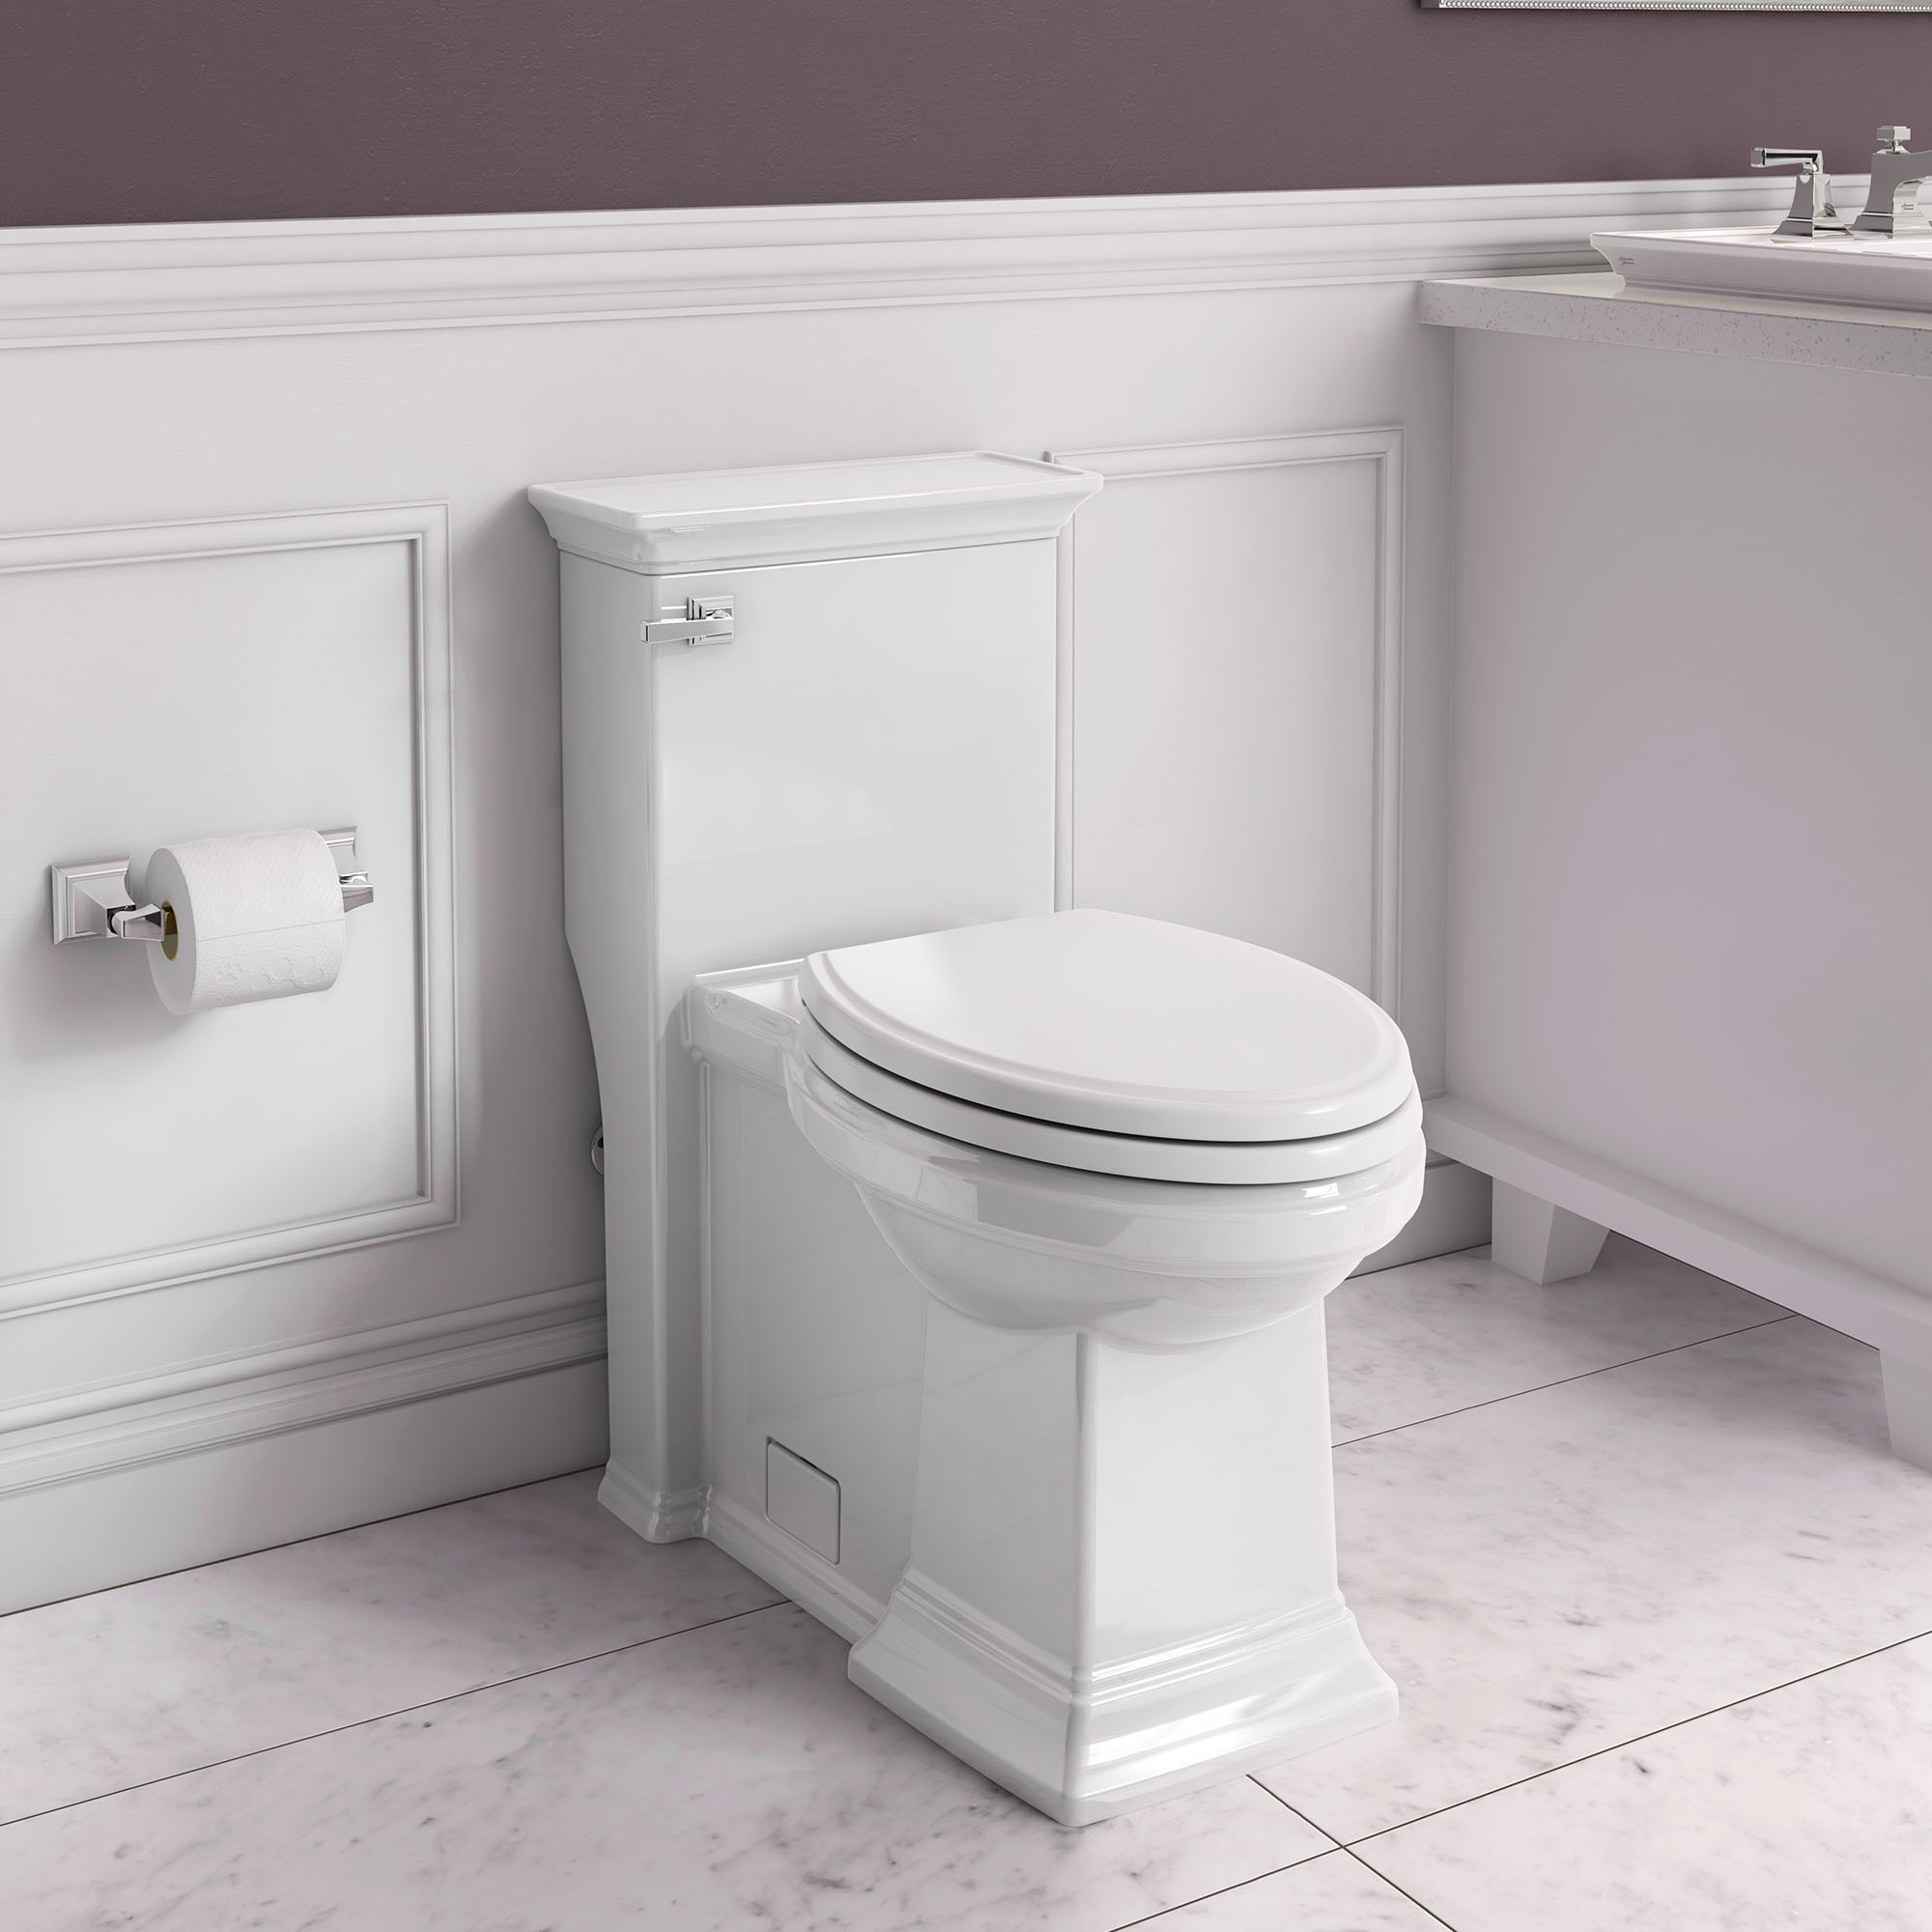 Town Square™ S One-Piece 1.28 gpf/4.8 Lpf Chair Height Elongated Toilet With Seat